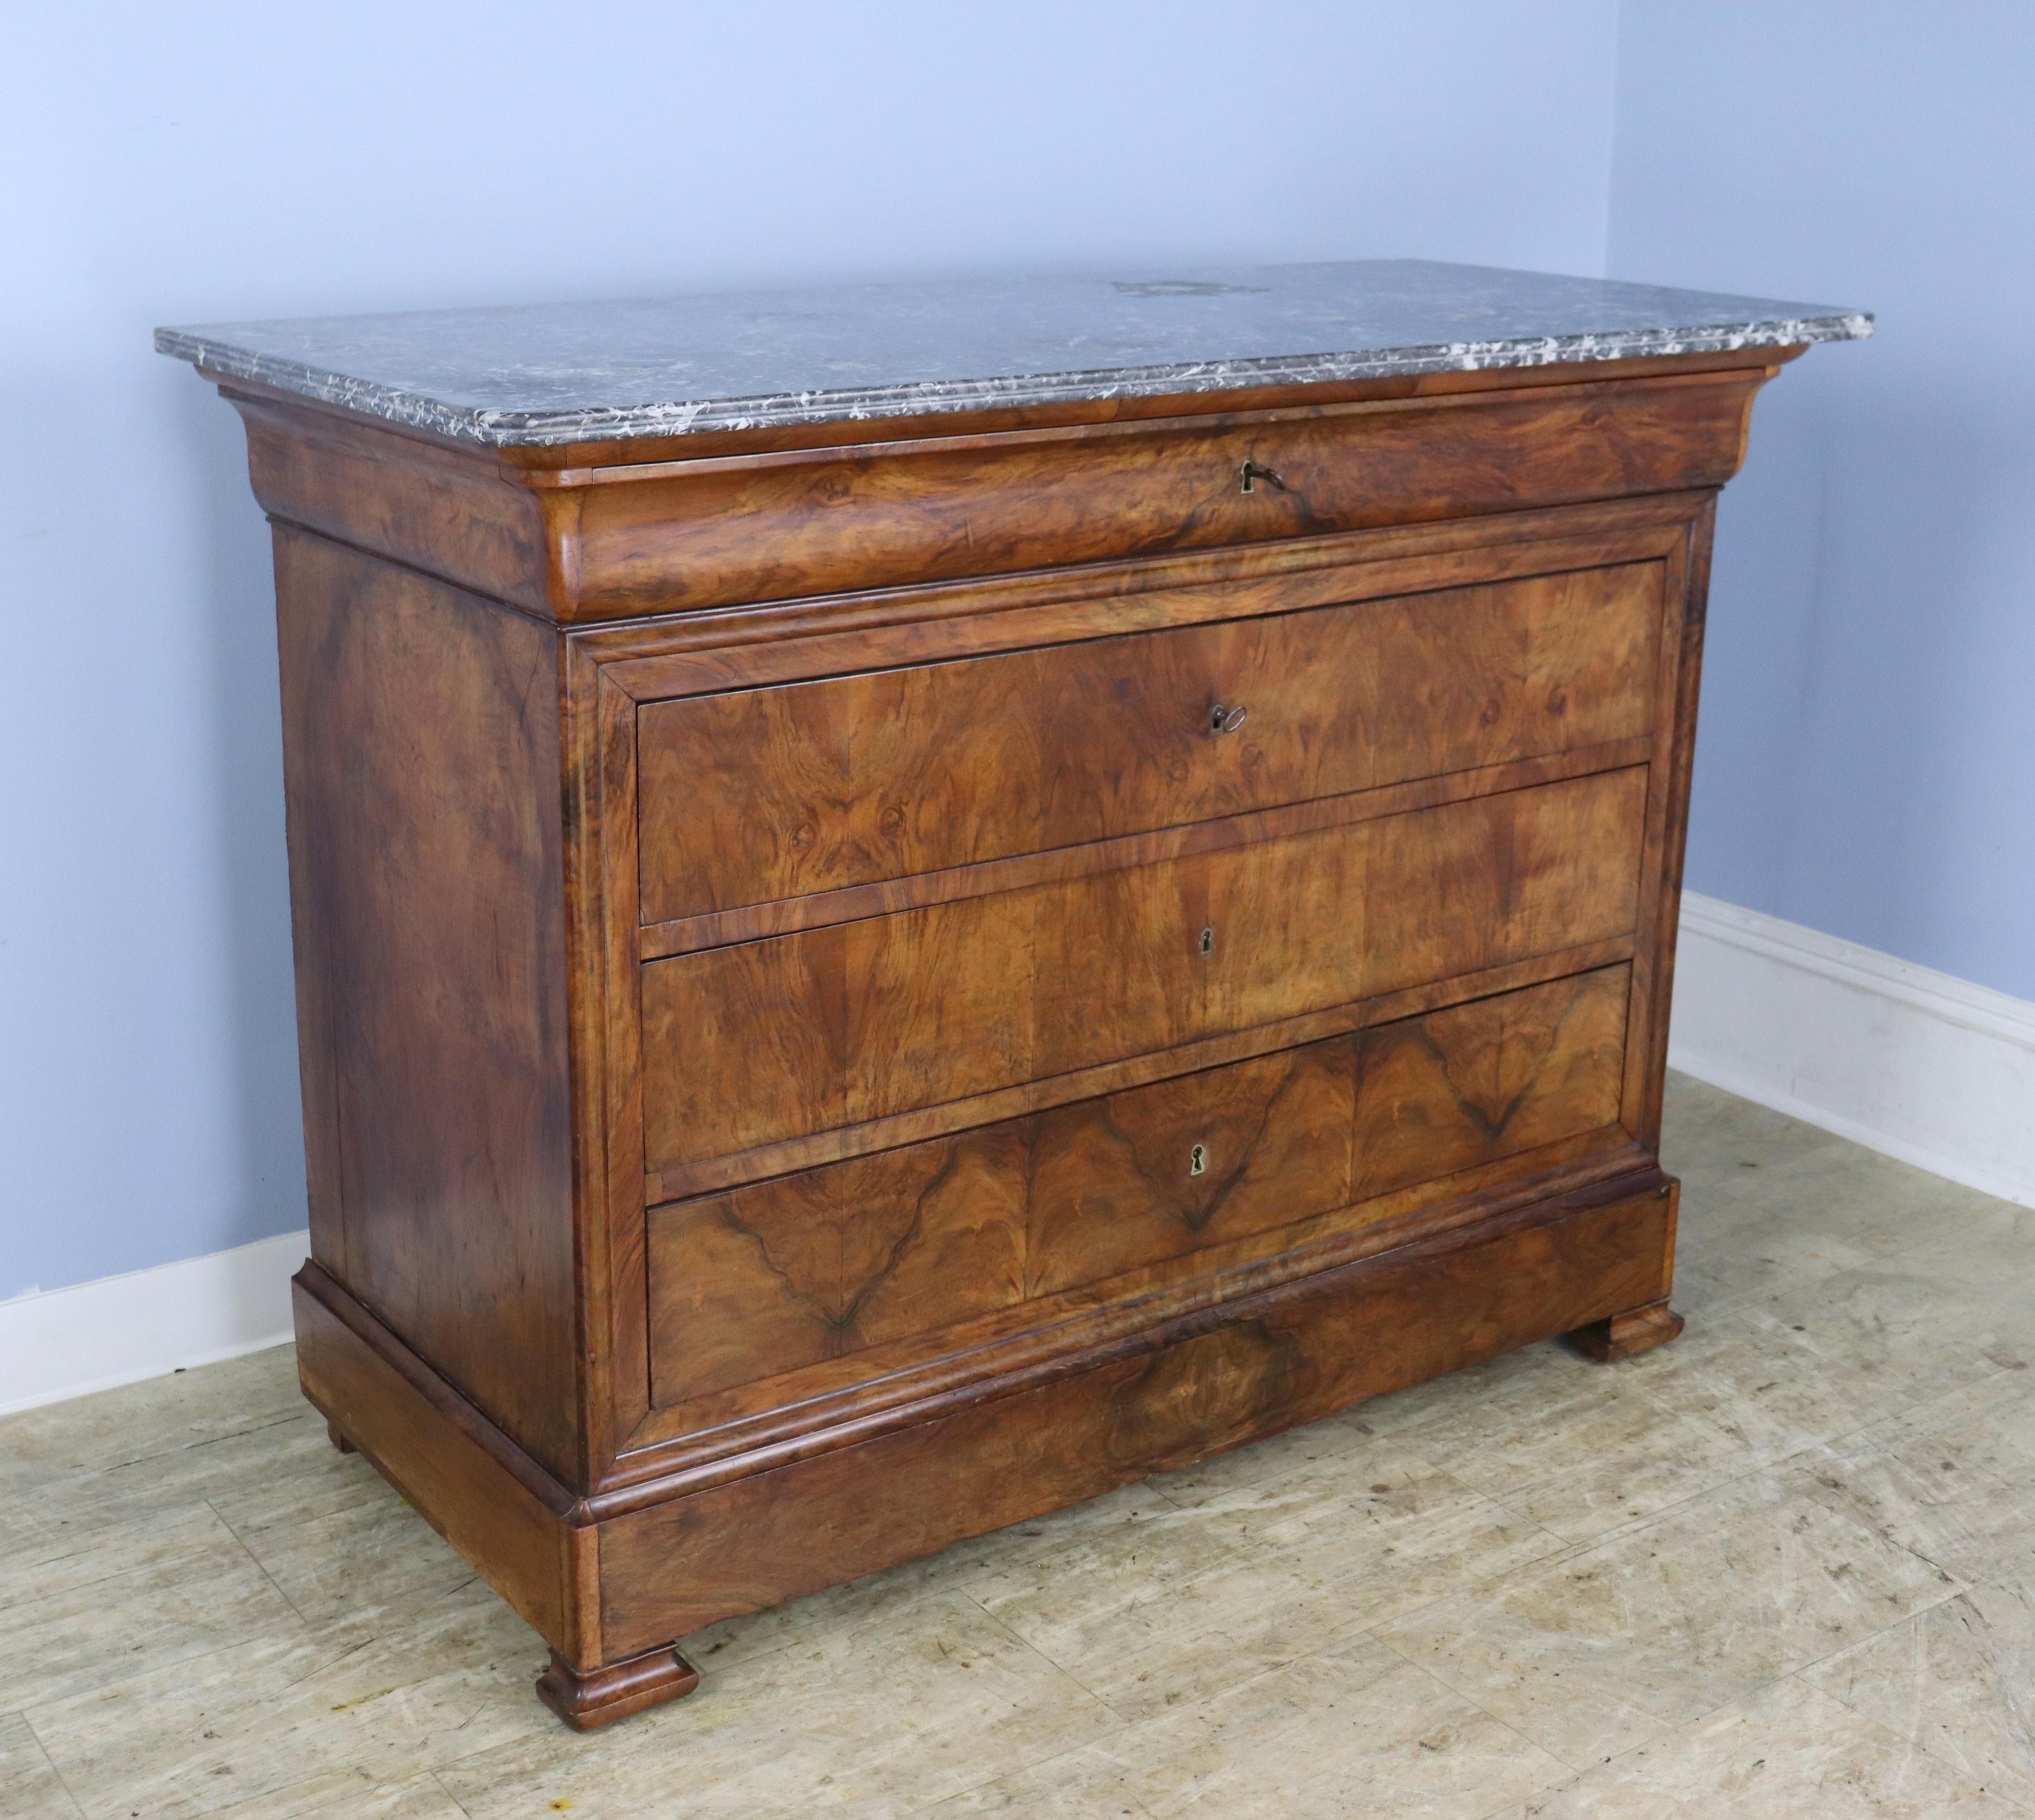 A classic Louis Philippe commode in dramatically grained walnut veneer.  Three wide drawers plus an extra hidden drawer in the top molding!  The book matched walnut has very good color and patina, and the marble is in moderate condition, with a